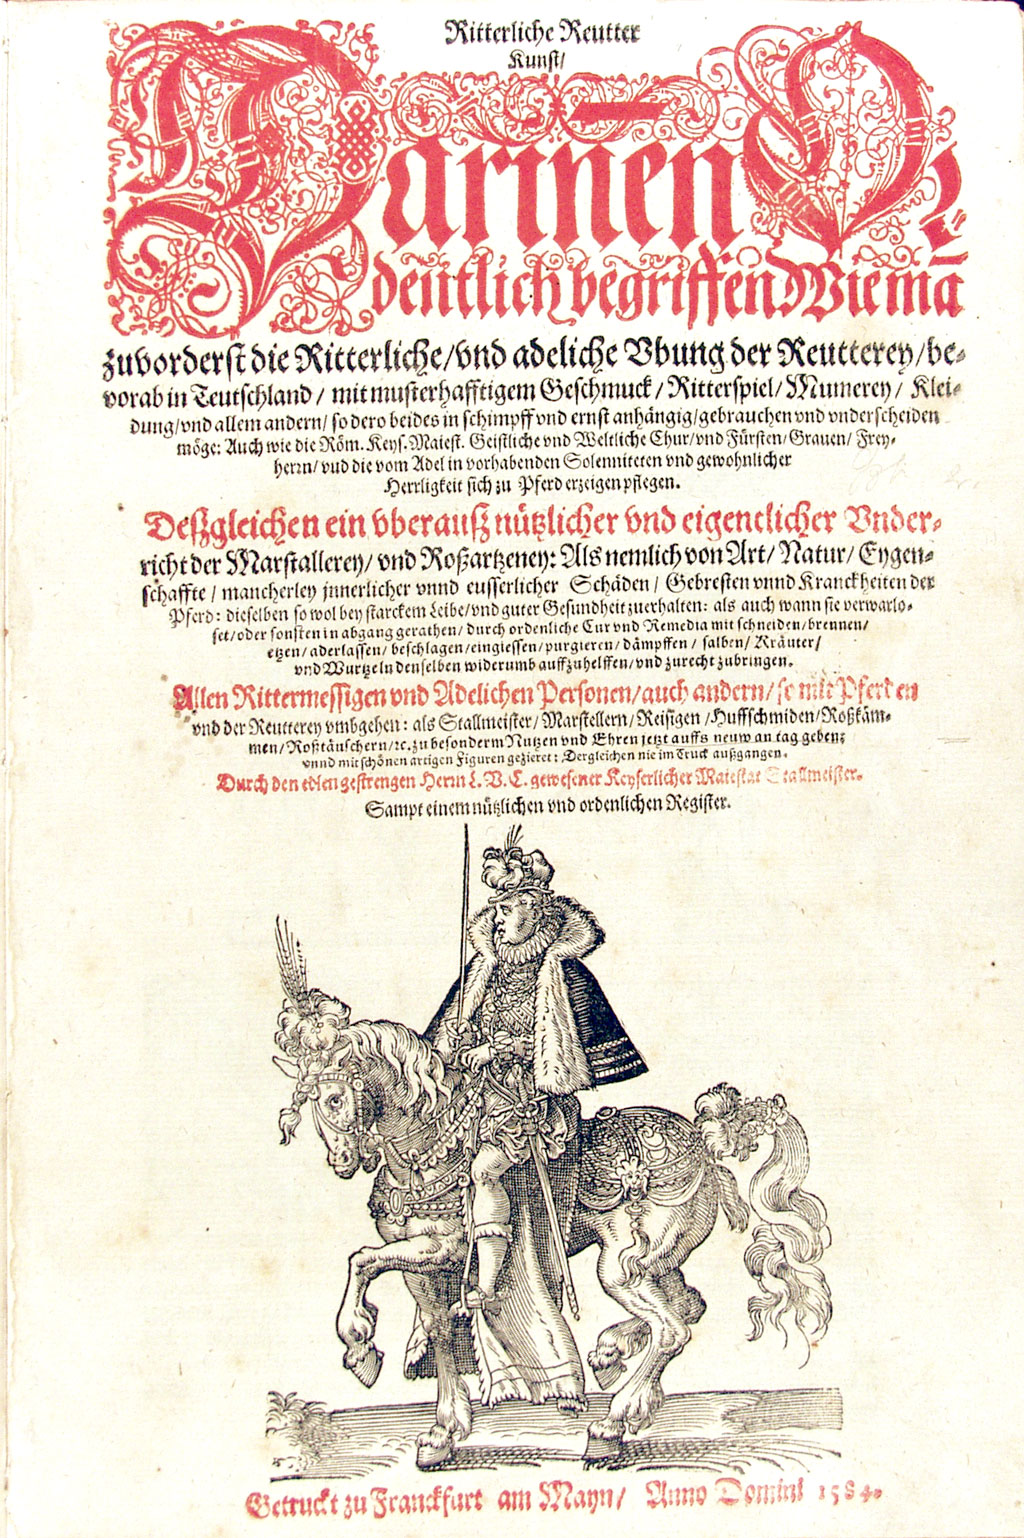 Title page, illustration of man  on horse